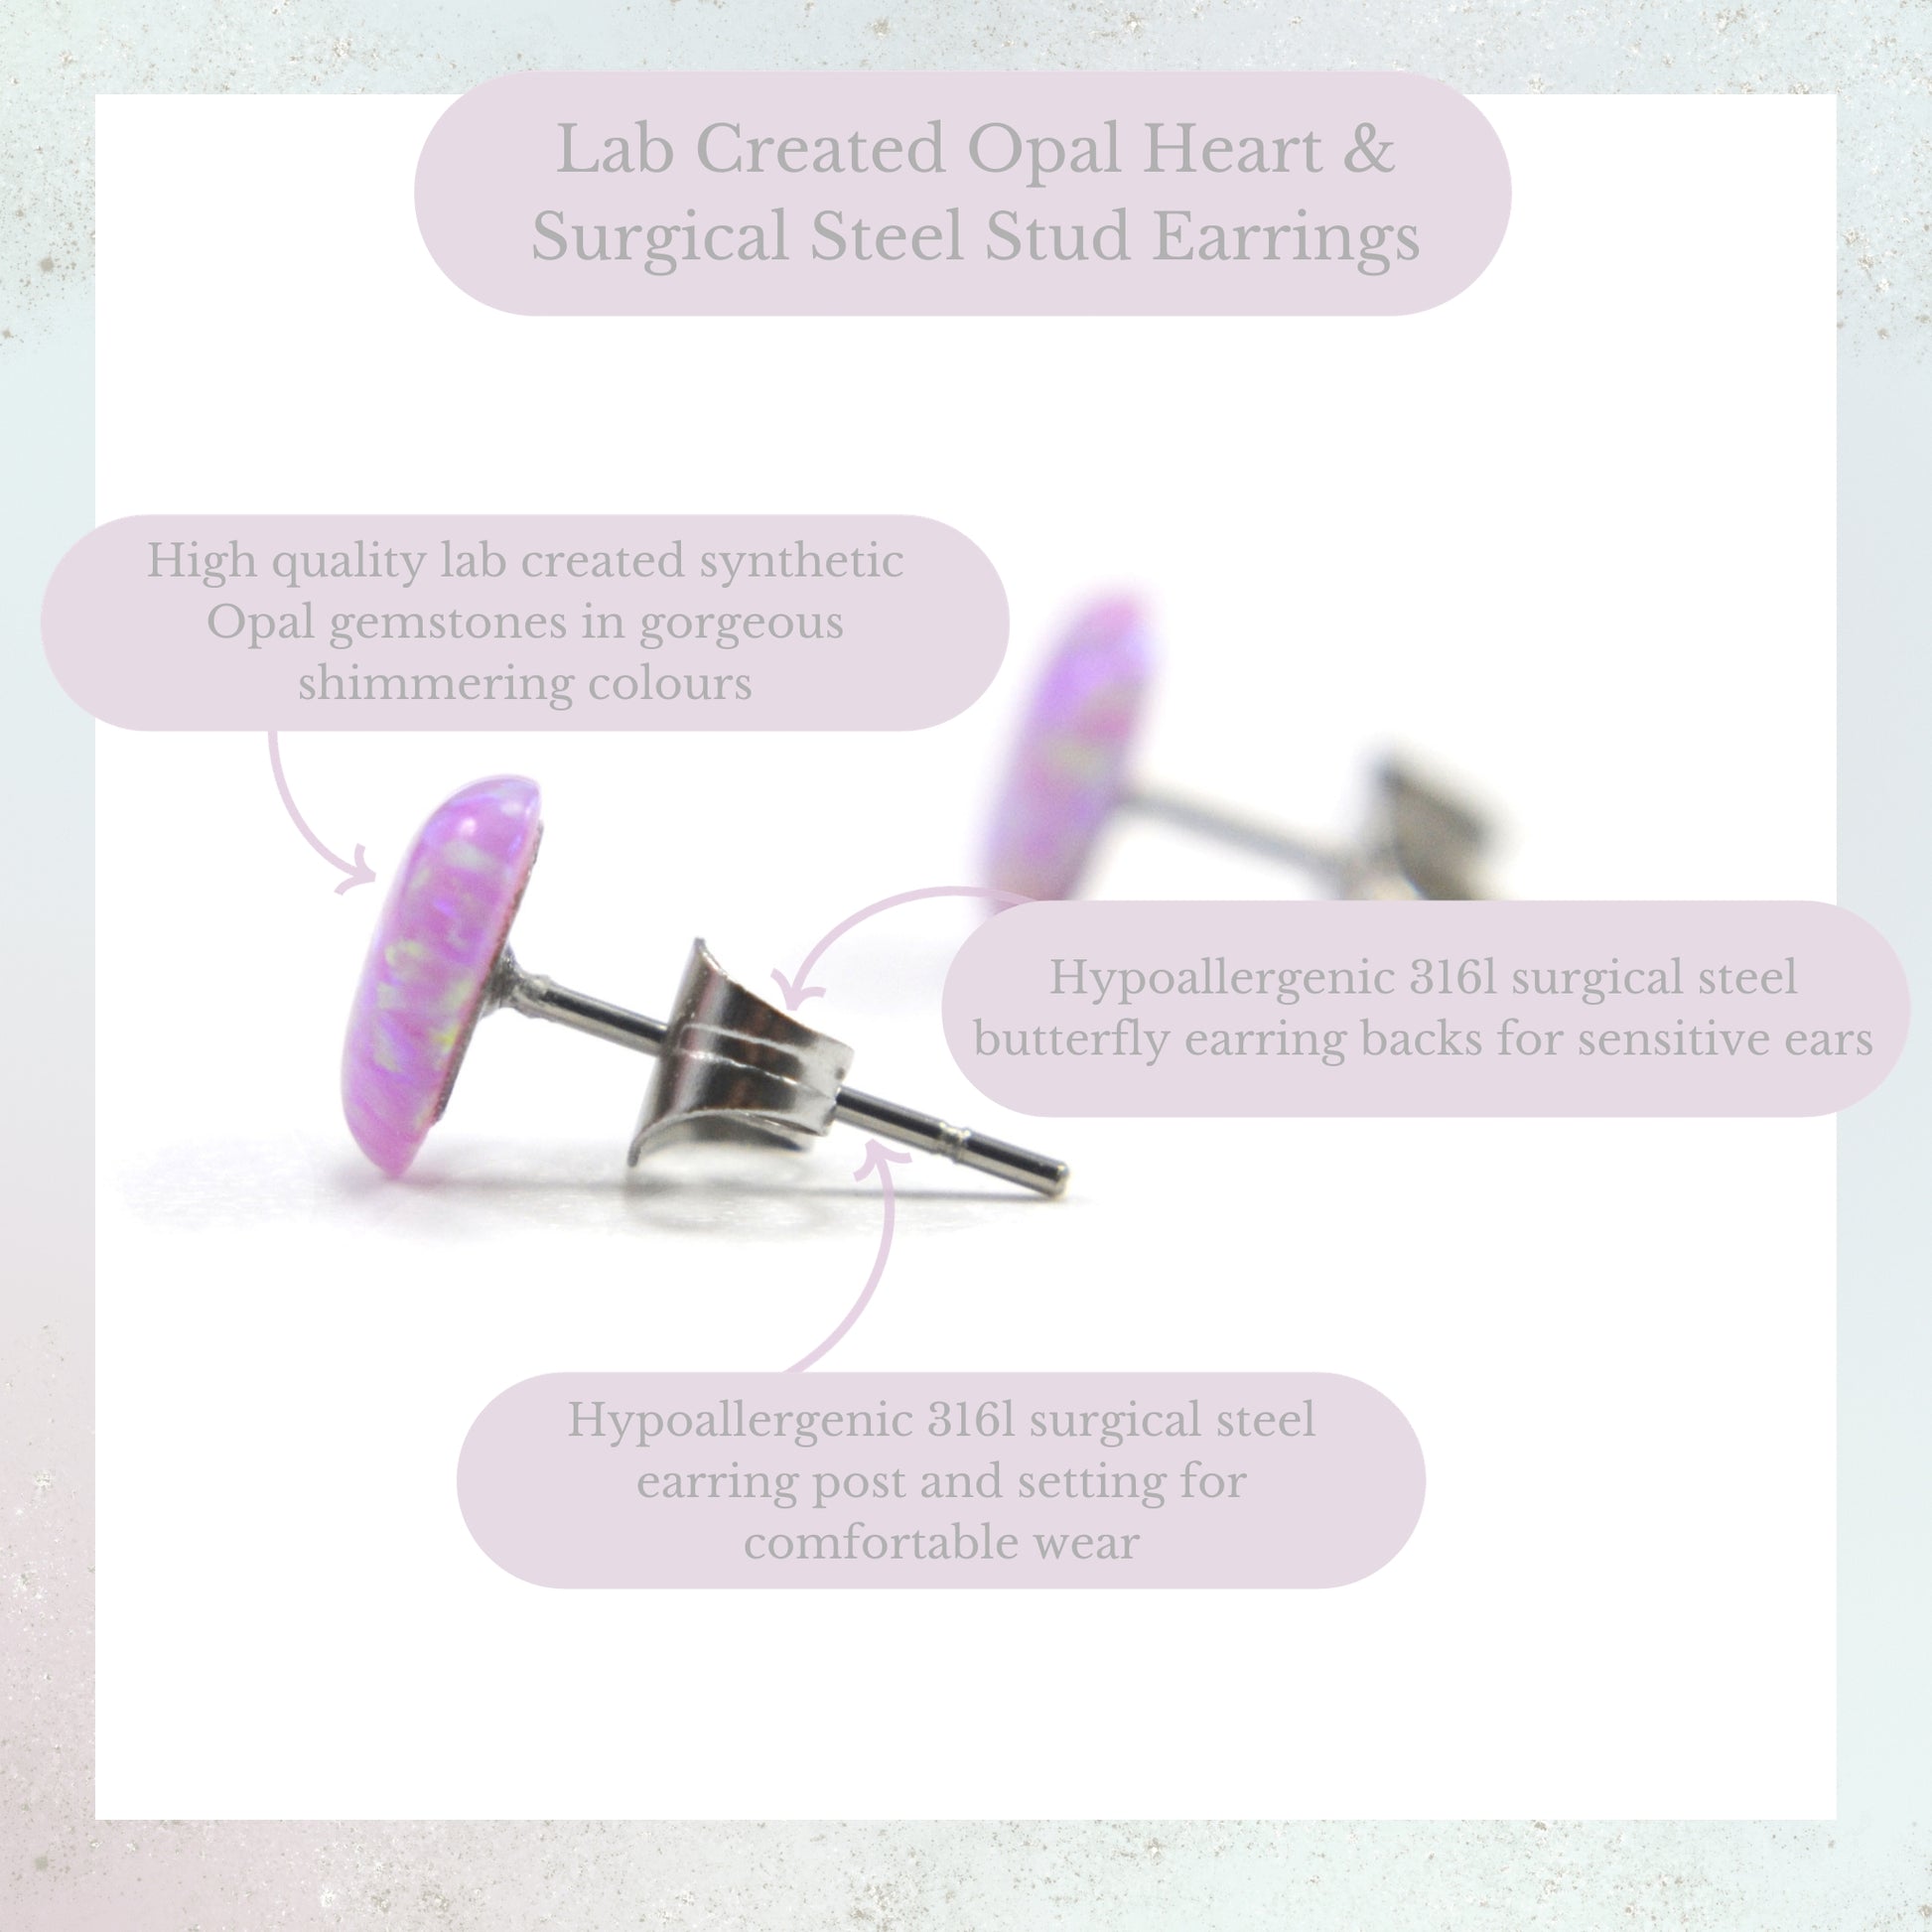 Pink Lab Created Opal Heart & Surgical Steel Stud Earrings Product Information Graphic